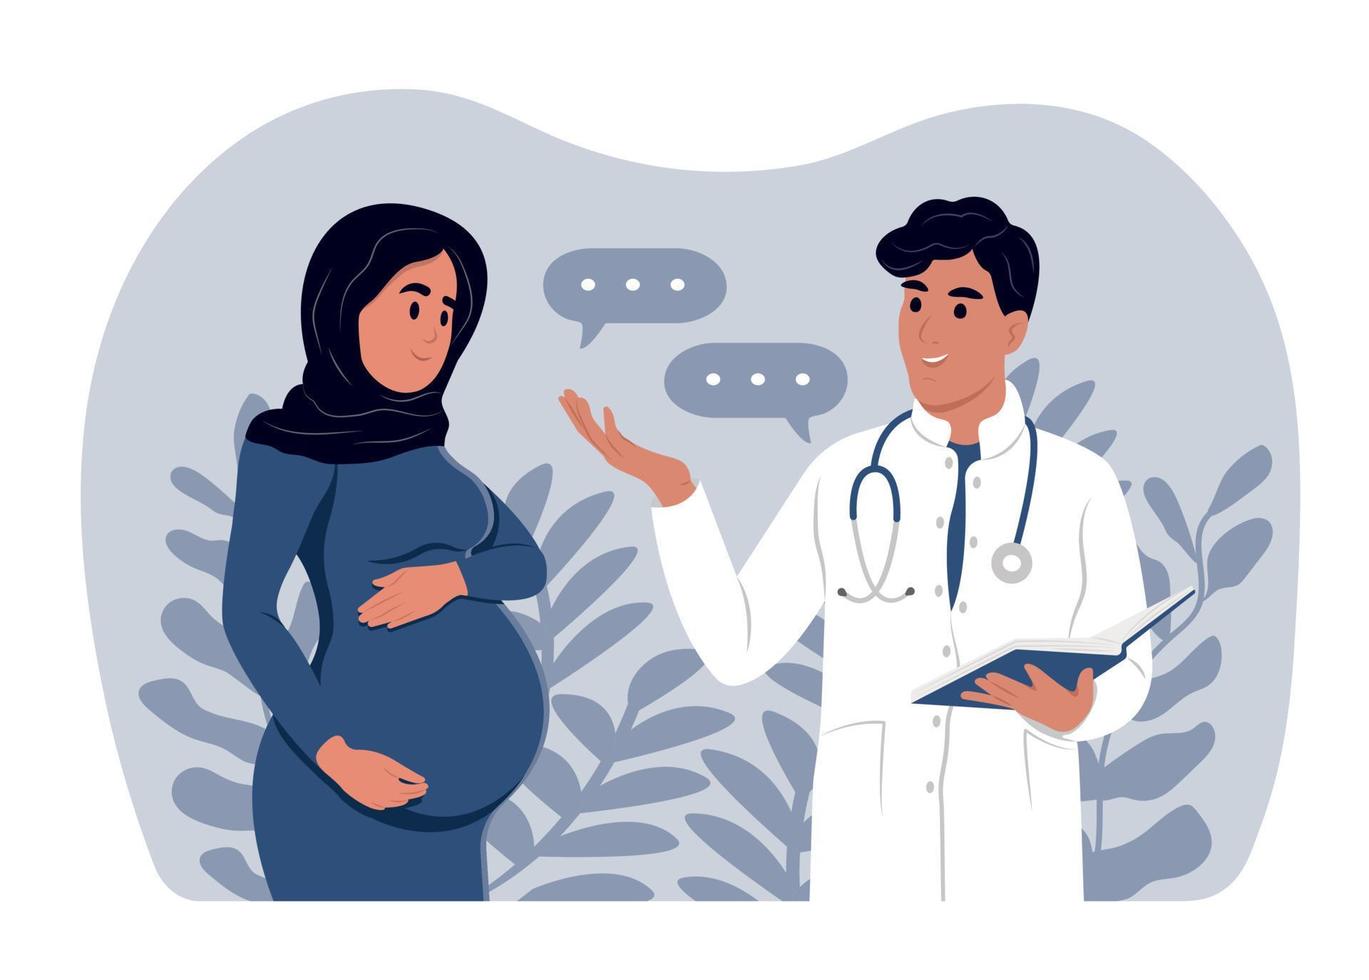 Muslim woman expecting a baby visits the doctors office, examination during pregnancy. A pregnant woman is talking to an obstetrician gynecologist. vector